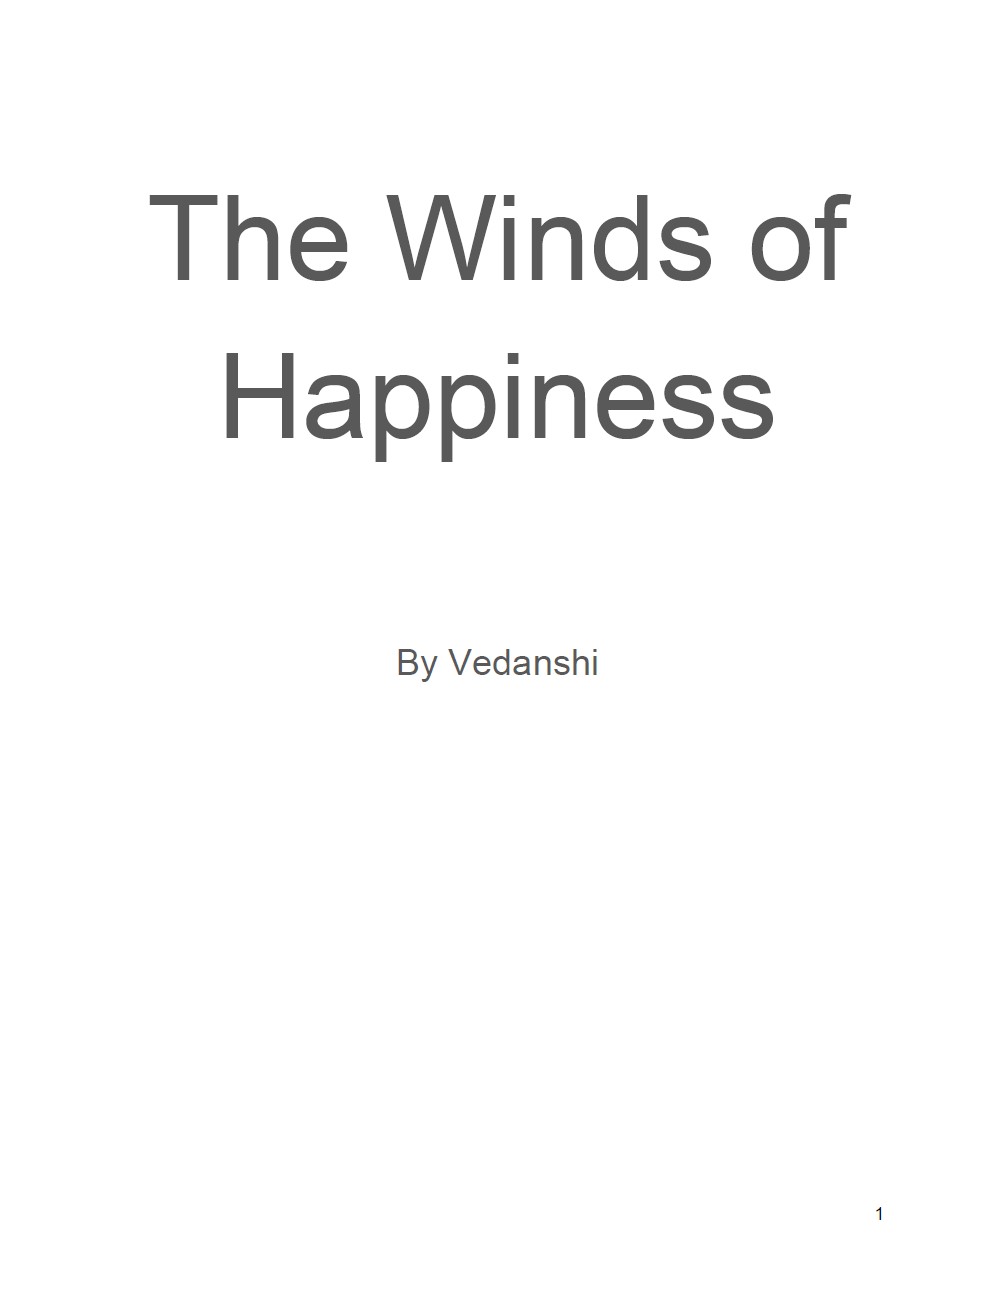 The Winds of Happiness by Vedanshi P.